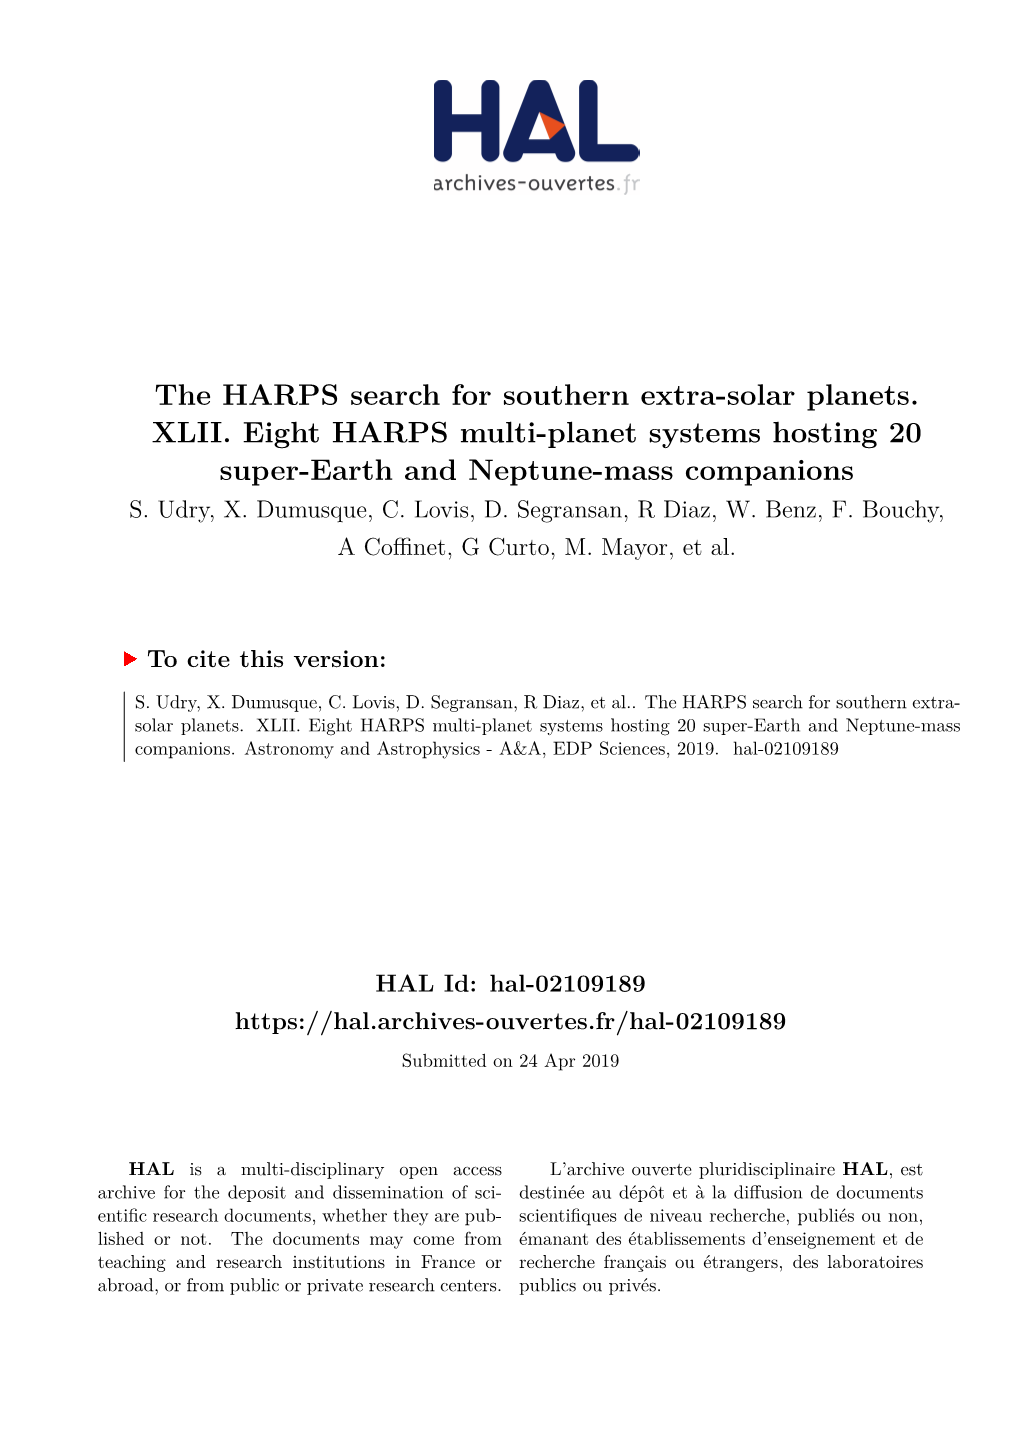 The HARPS Search for Southern Extra-Solar Planets. XLII. Eight HARPS Multi-Planet Systems Hosting 20 Super-Earth and Neptune-Mass Companions S